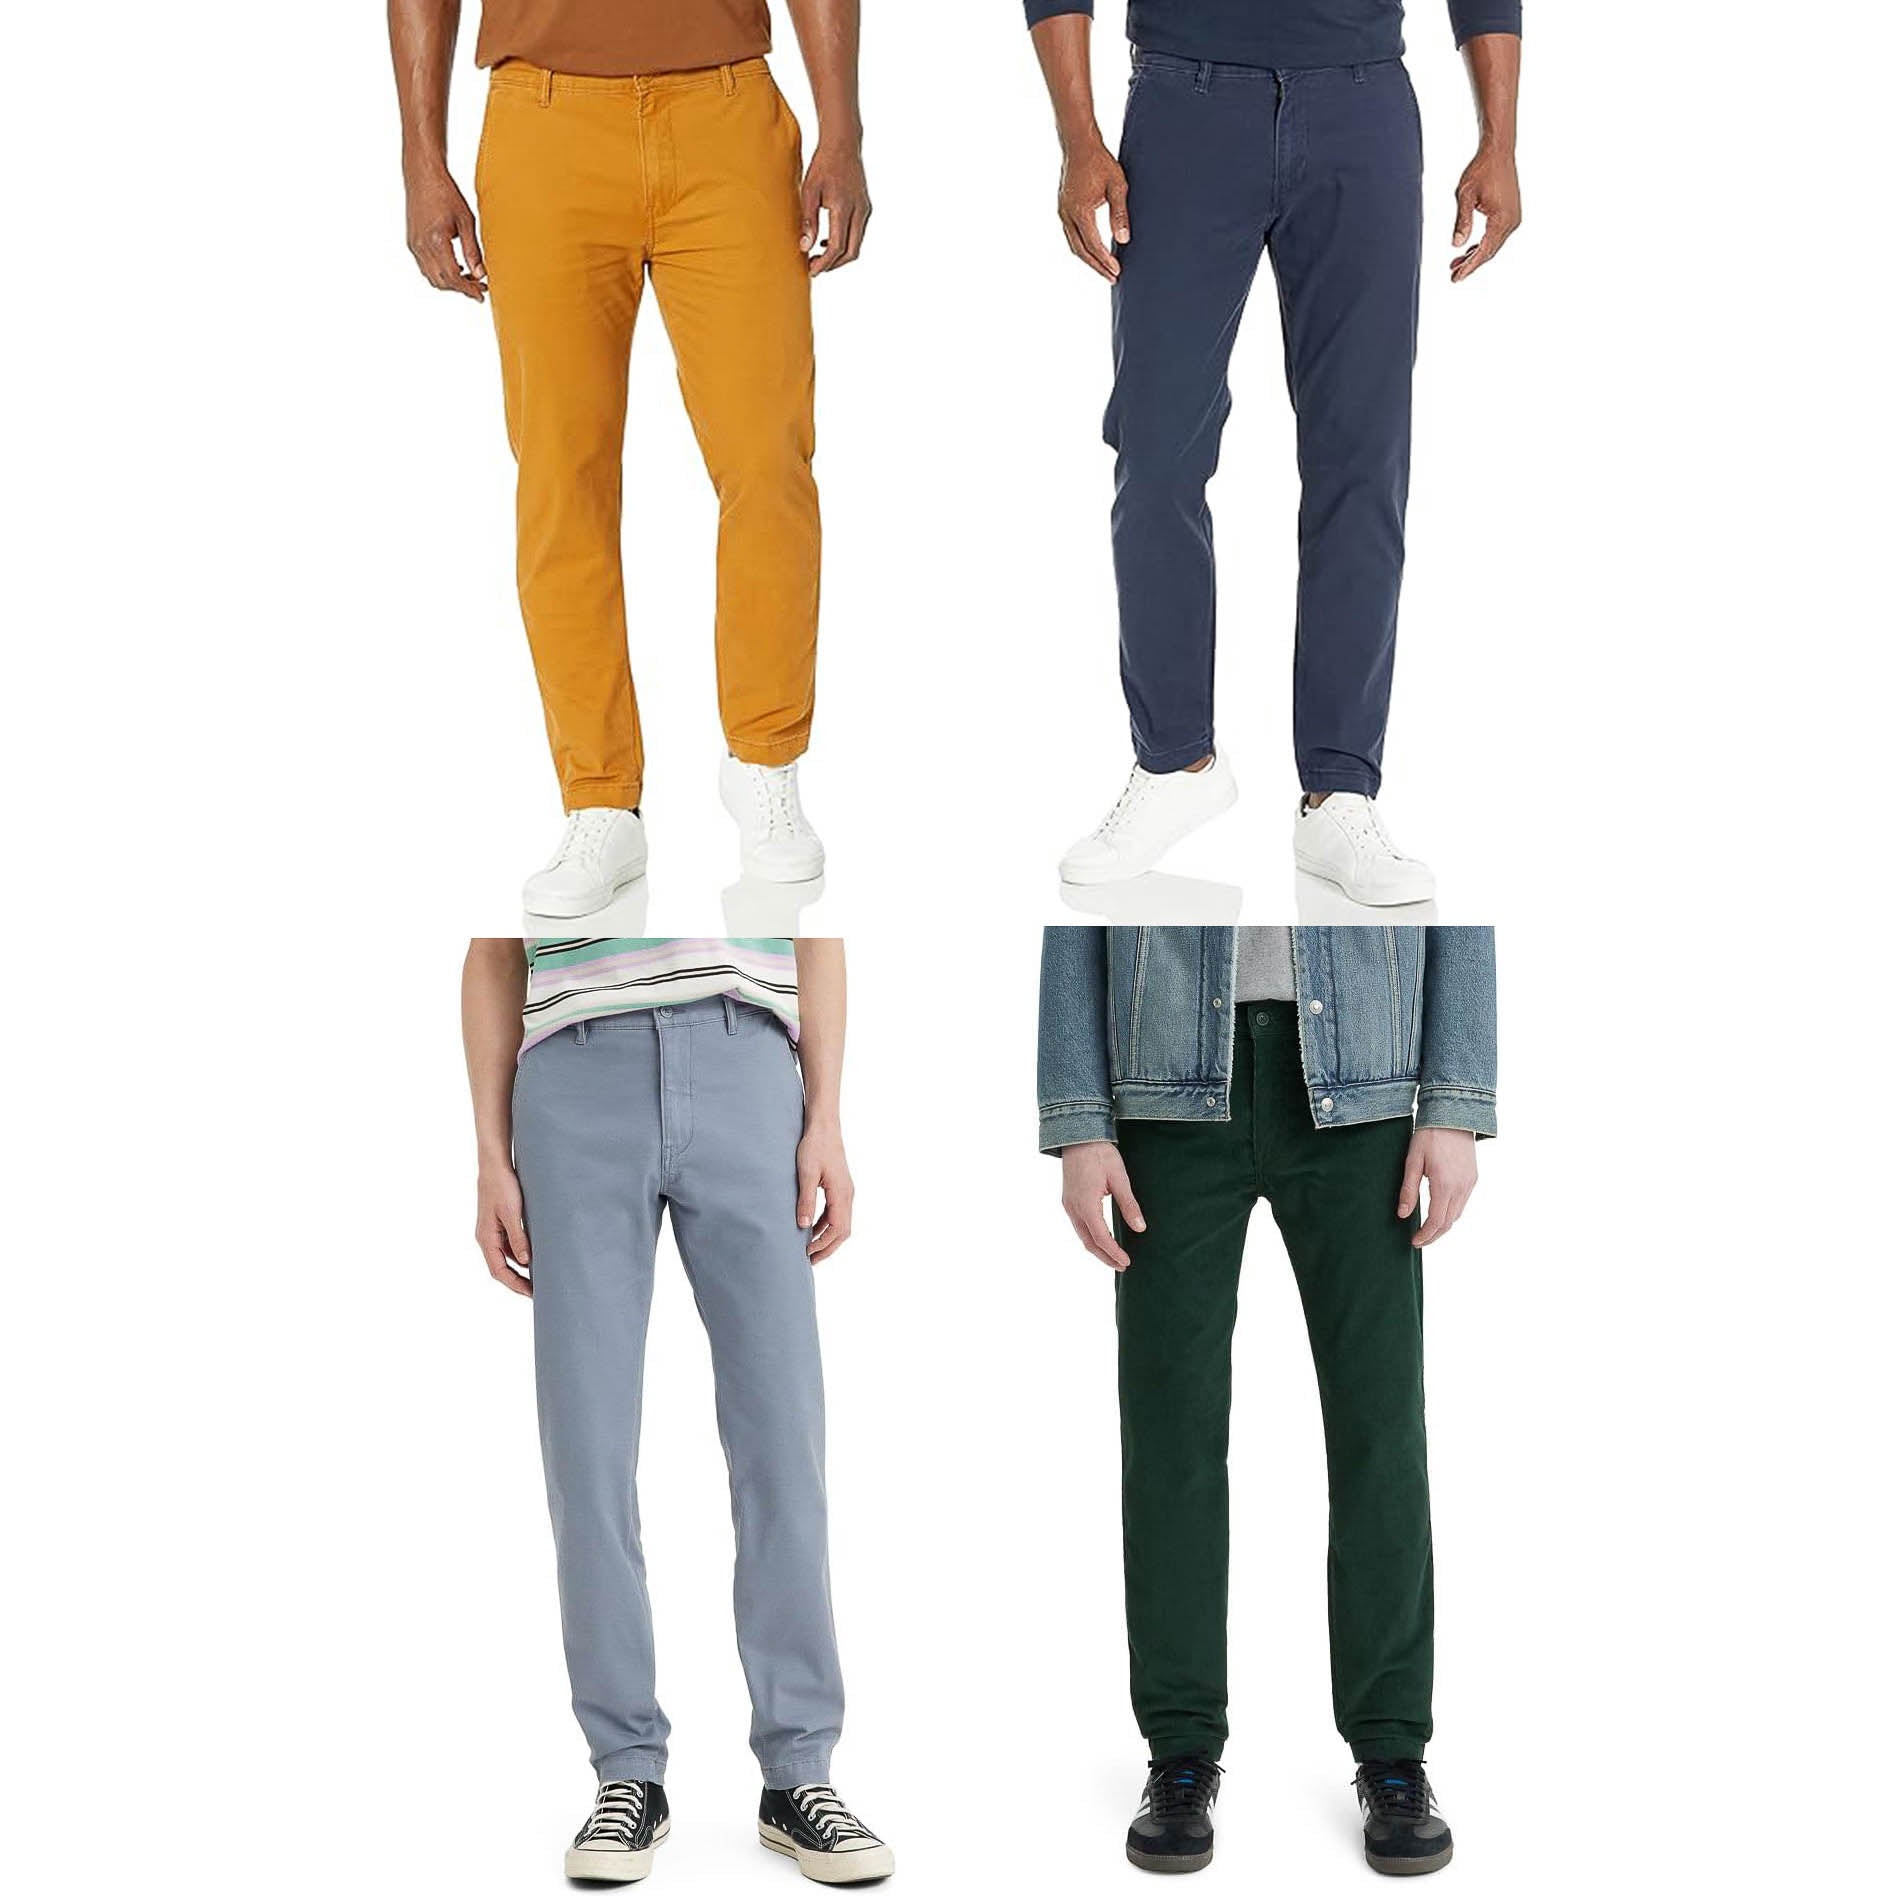 LEVIS CHINO PANTS ASSORTED - LCHN04